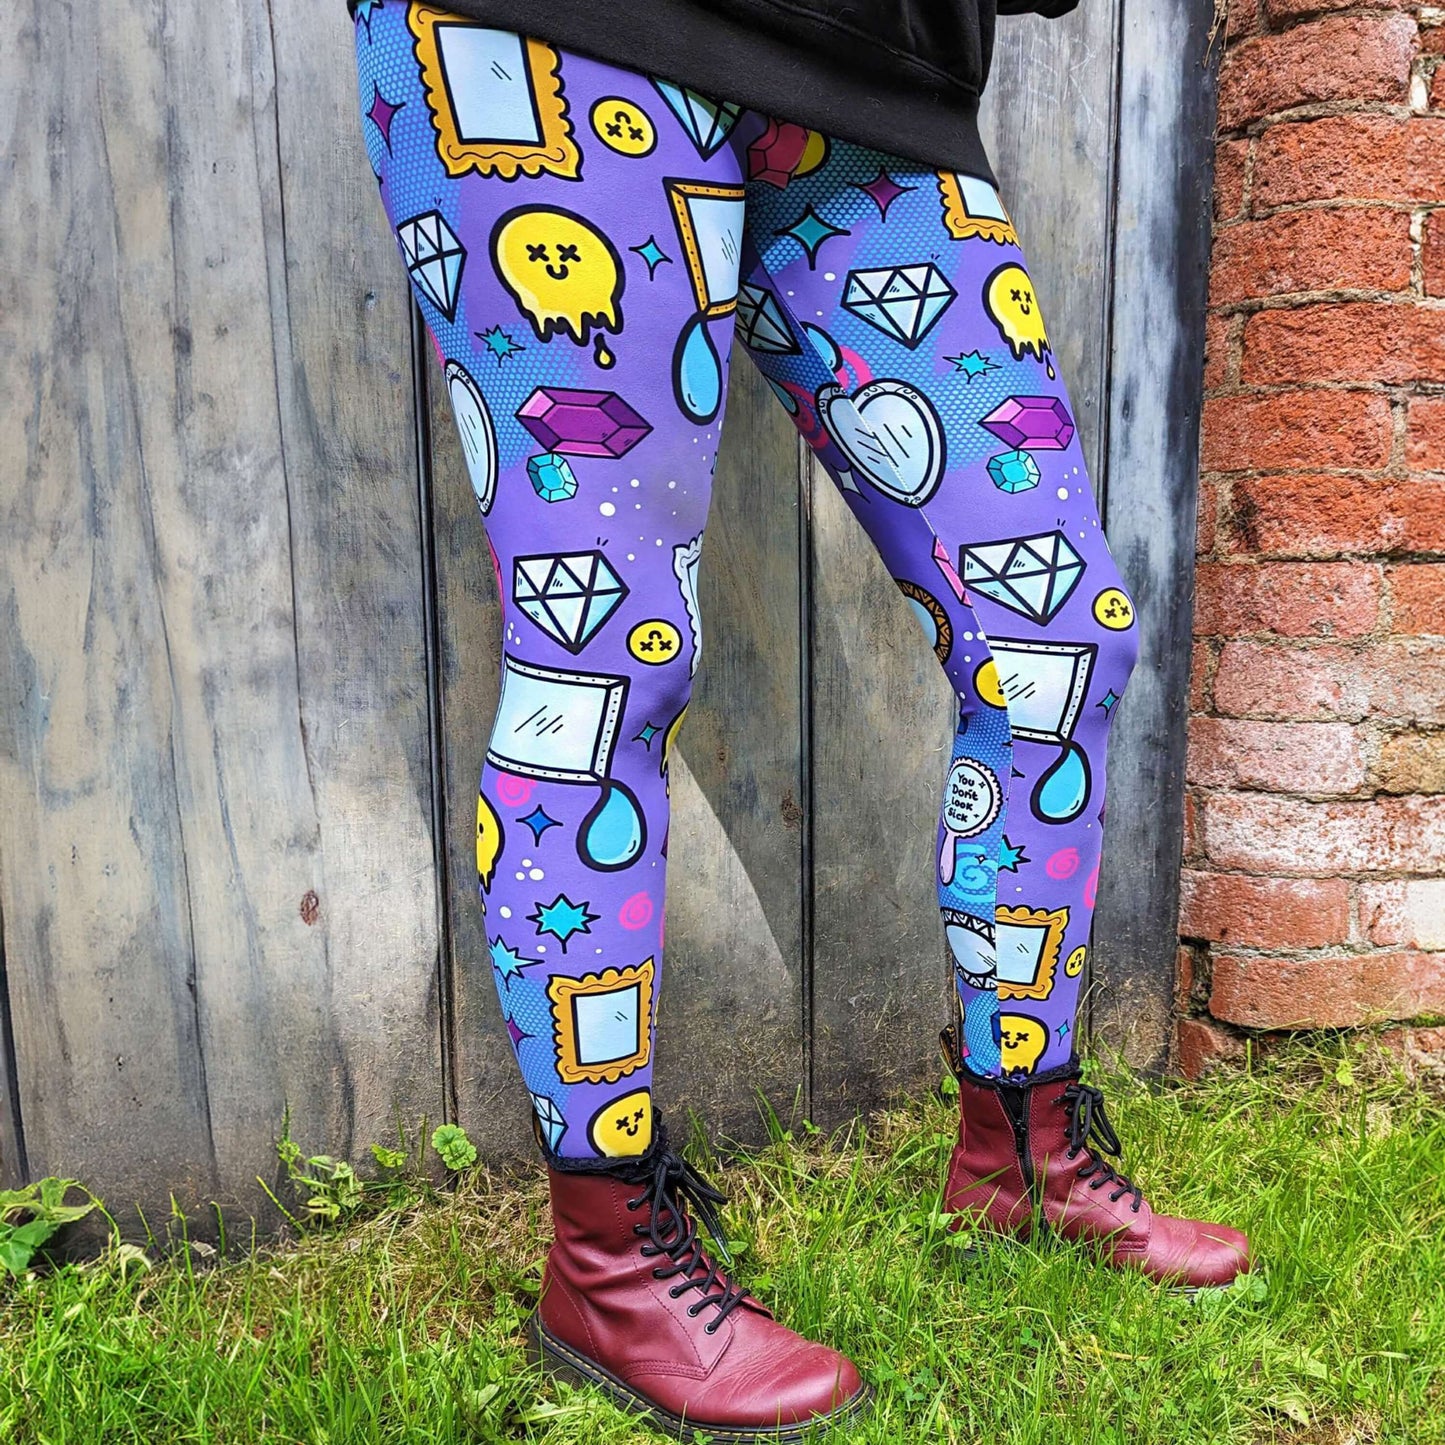 The You Don't Look Sick Leggings modelled by the owner of Innabox Nikky with red boots and the innabox invisible illness club sweater. She is stood in front of a wooden door next to a brick wall. The purple base leggings features melting yellow smiley faces, mirrors, gemstones, teardrops, sparkles, swirls and dots with a centre hand held mirror reading 'you don't look sick'. The hand drawn design is raising awareness for invisible illnesses.